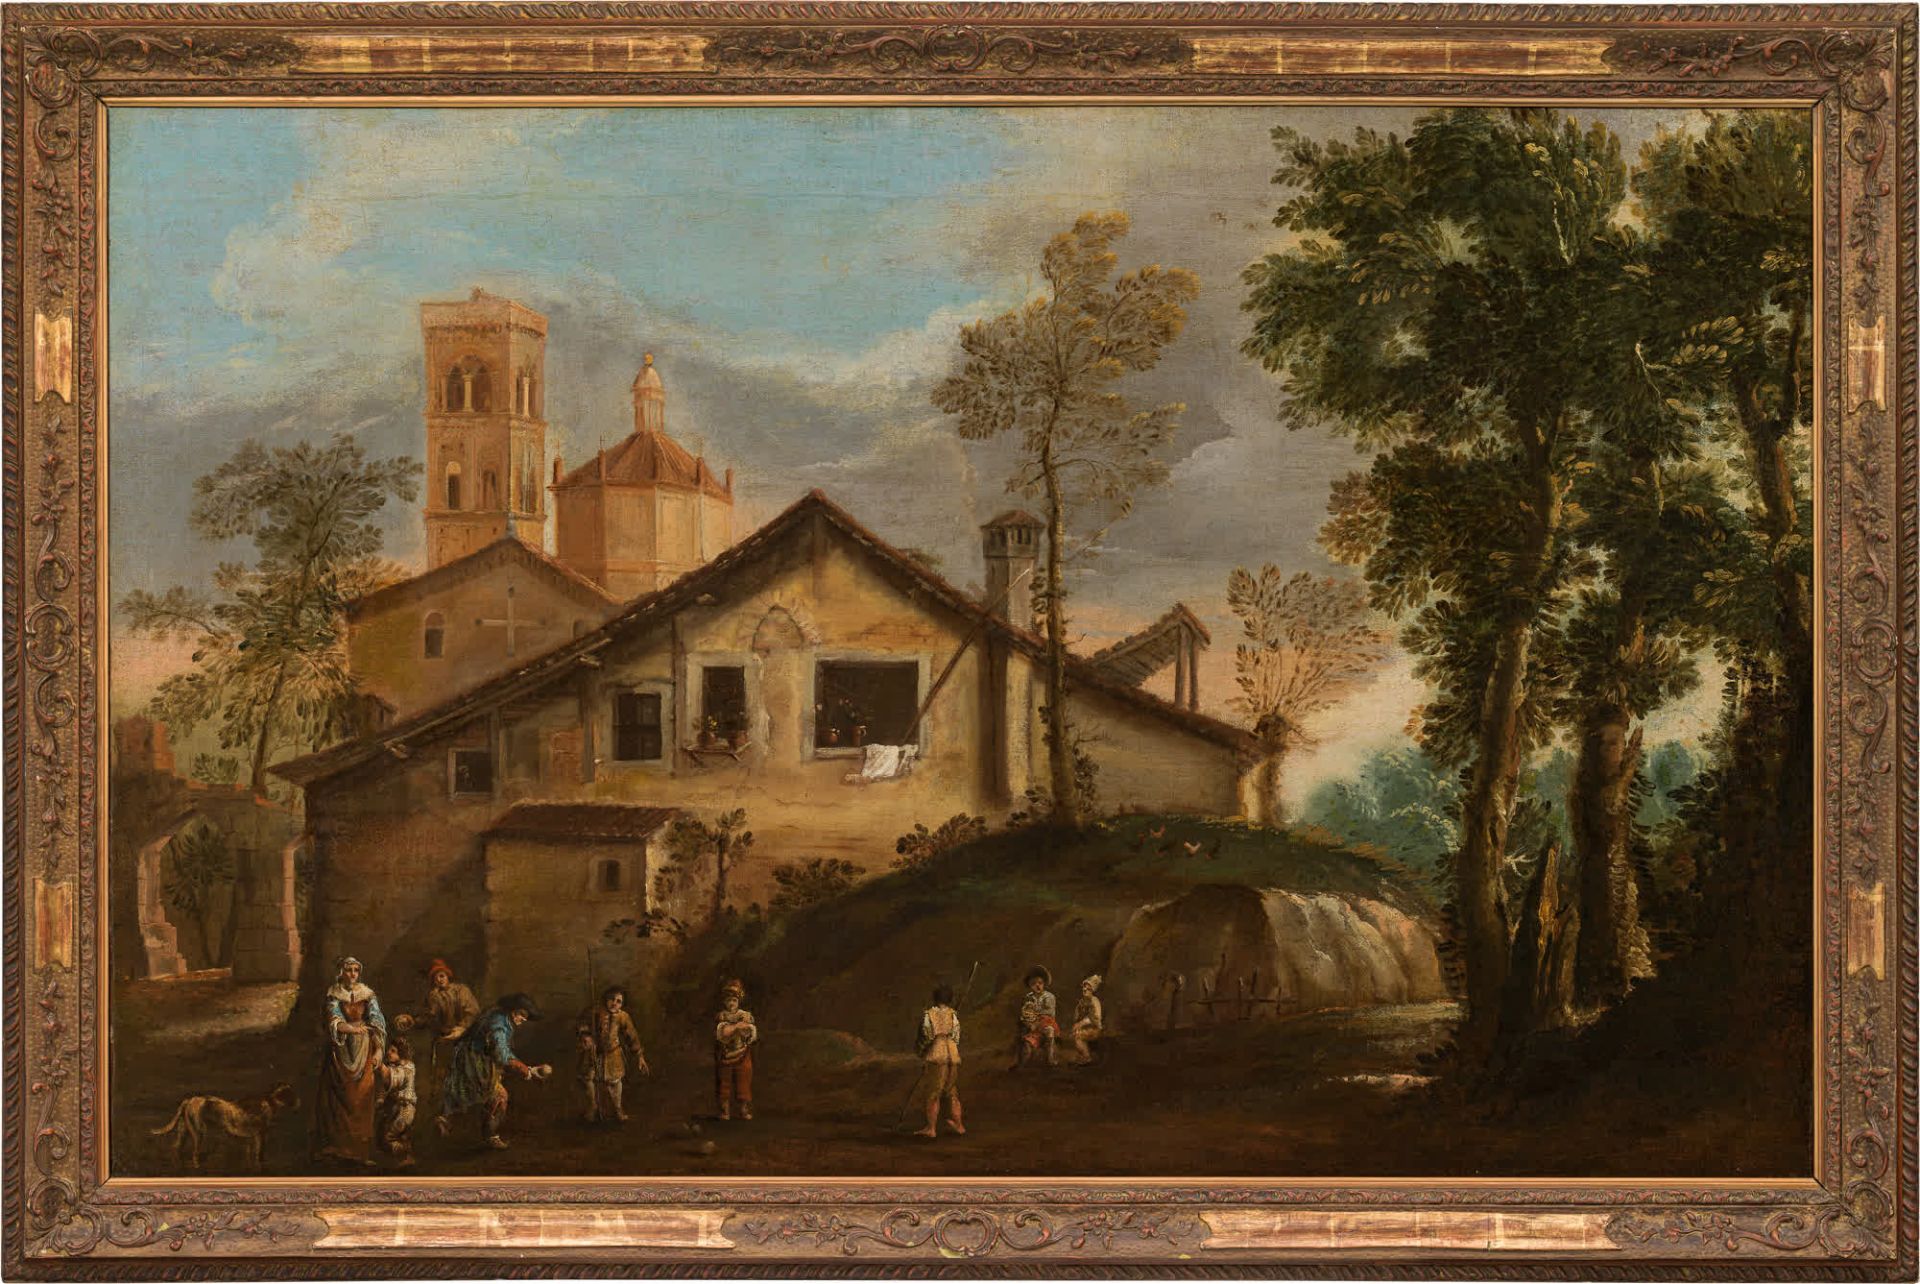 Venetian School: Boccia players in front of a village - Image 2 of 2